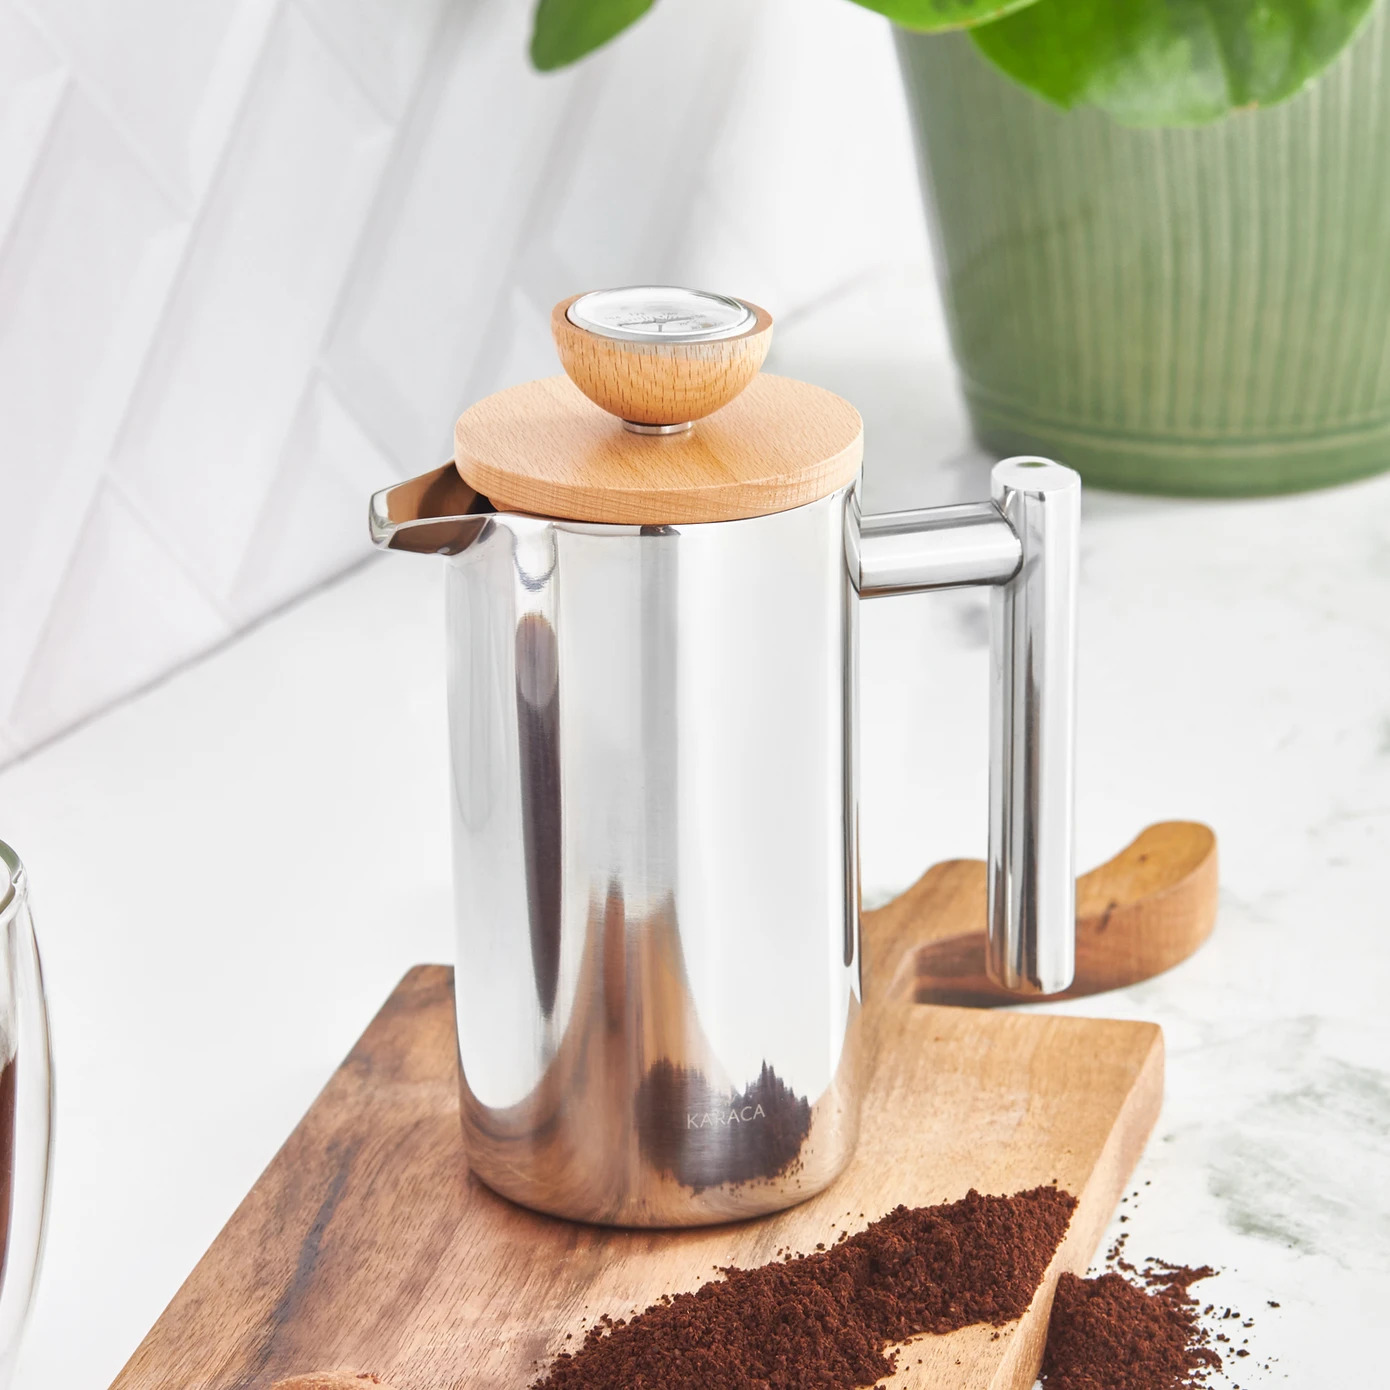 https://traditionalturk.com/wp-content/uploads/2022/08/stainless-steel-wood-french-press-350-ml.jpg